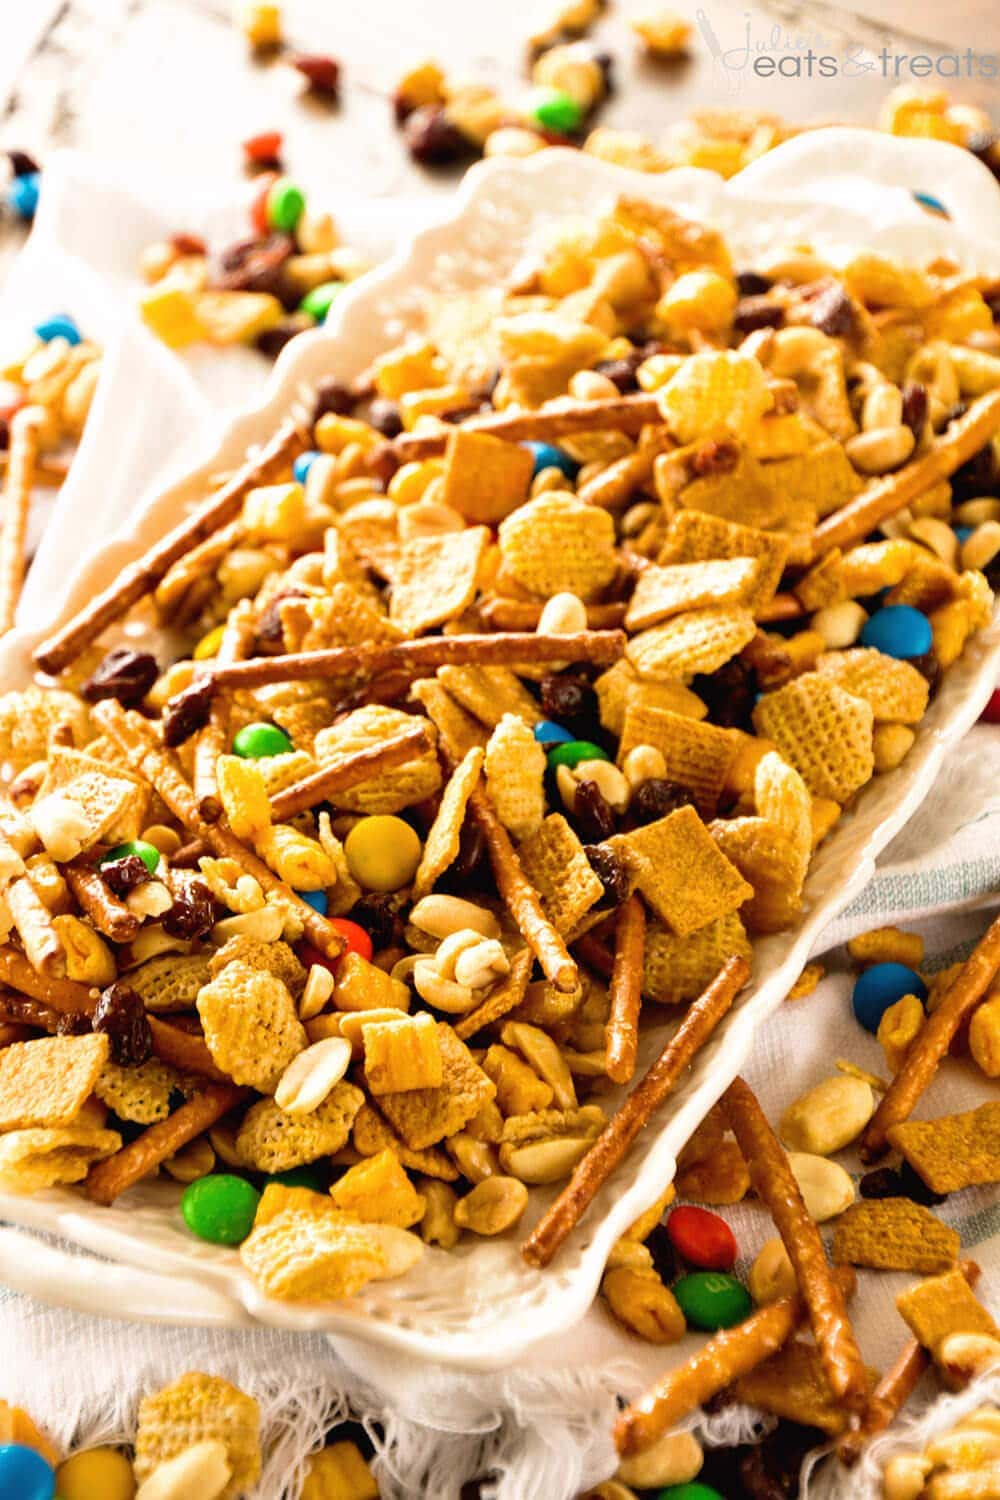 Snack Mix ~ This Snack Mix is like CRACK! So Addictive and Delicious! Full of Cereal, Pretzels, Peanuts, M&Ms and Raisins! Perfect for Christmas and Holiday Parties!